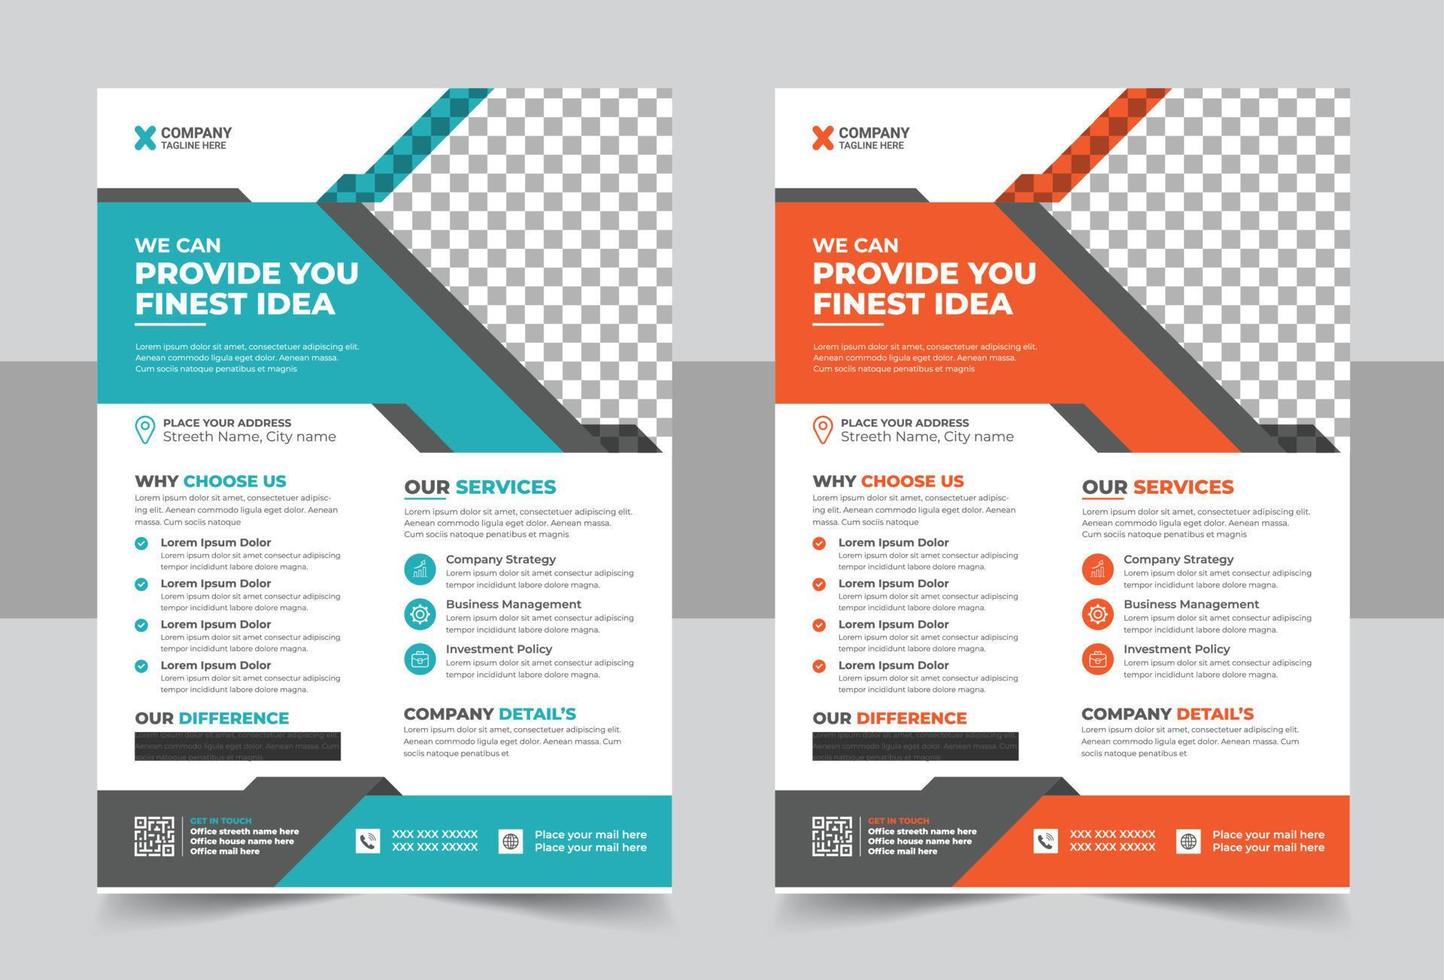 Corporate Business Flyer poster pamphlet brochure cover design layout background, two colors scheme, vector template in A4 size - Vector